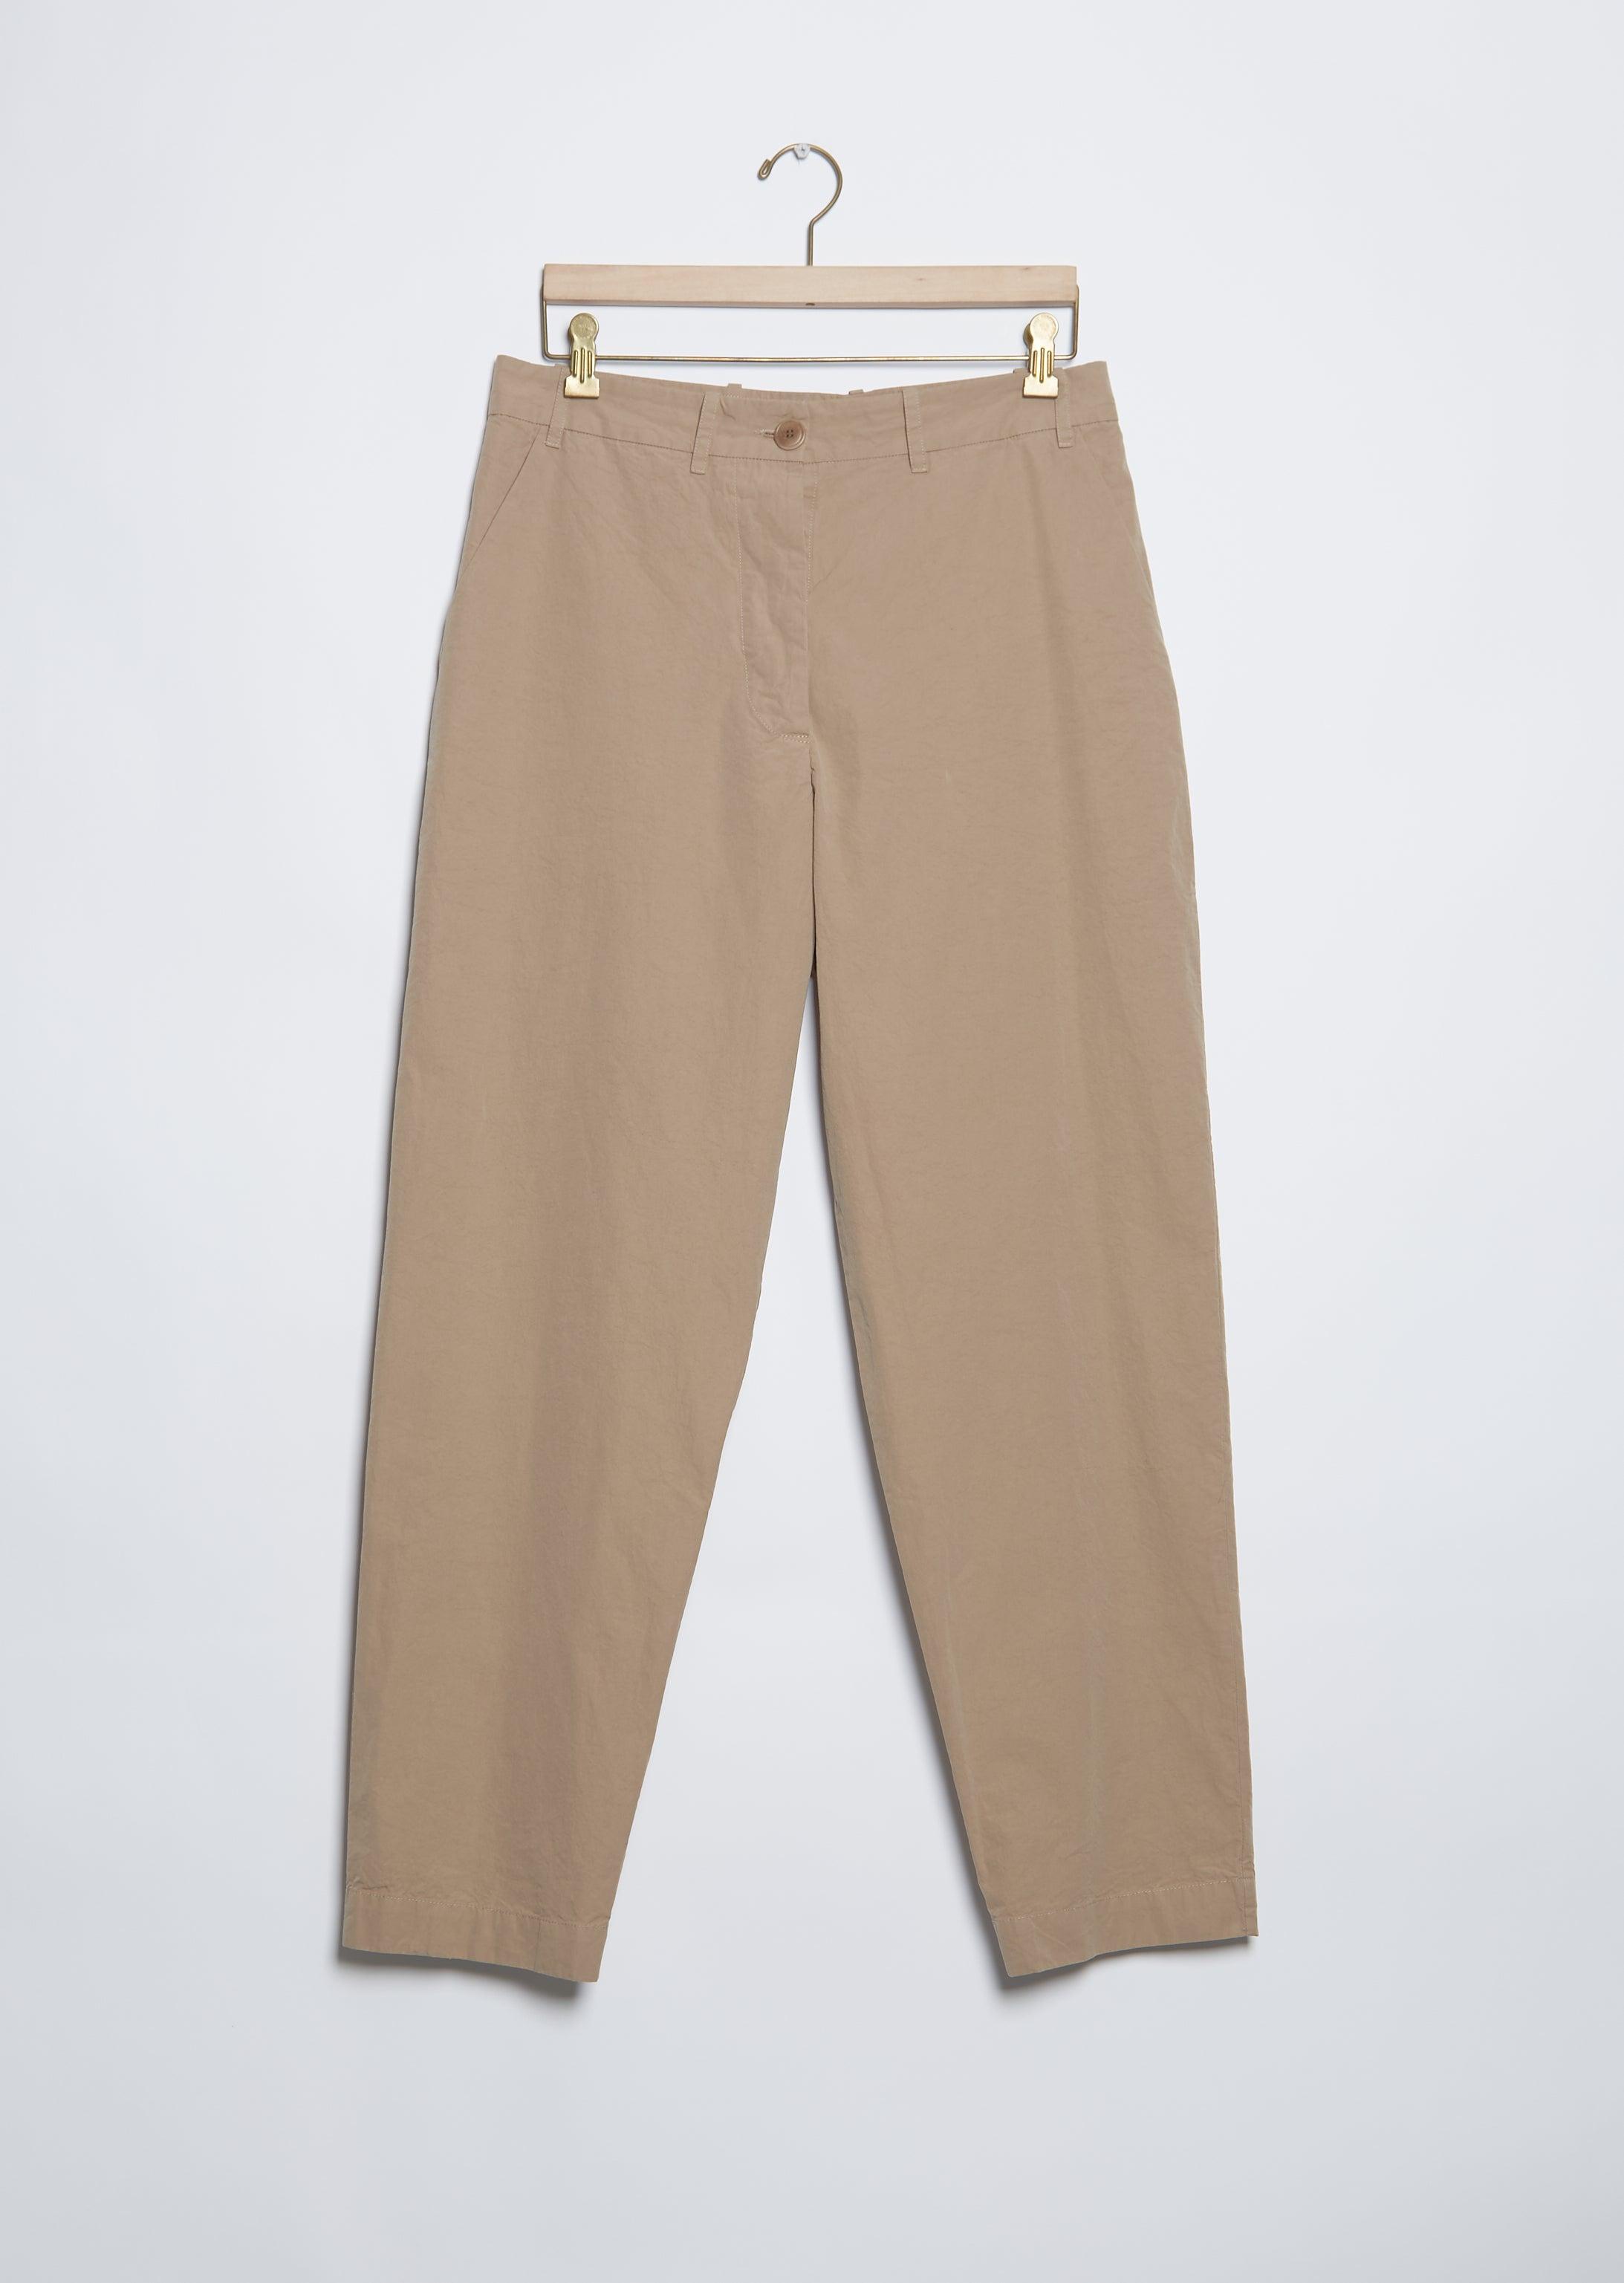 Casey Casey Ah Pant in Natural | Lyst